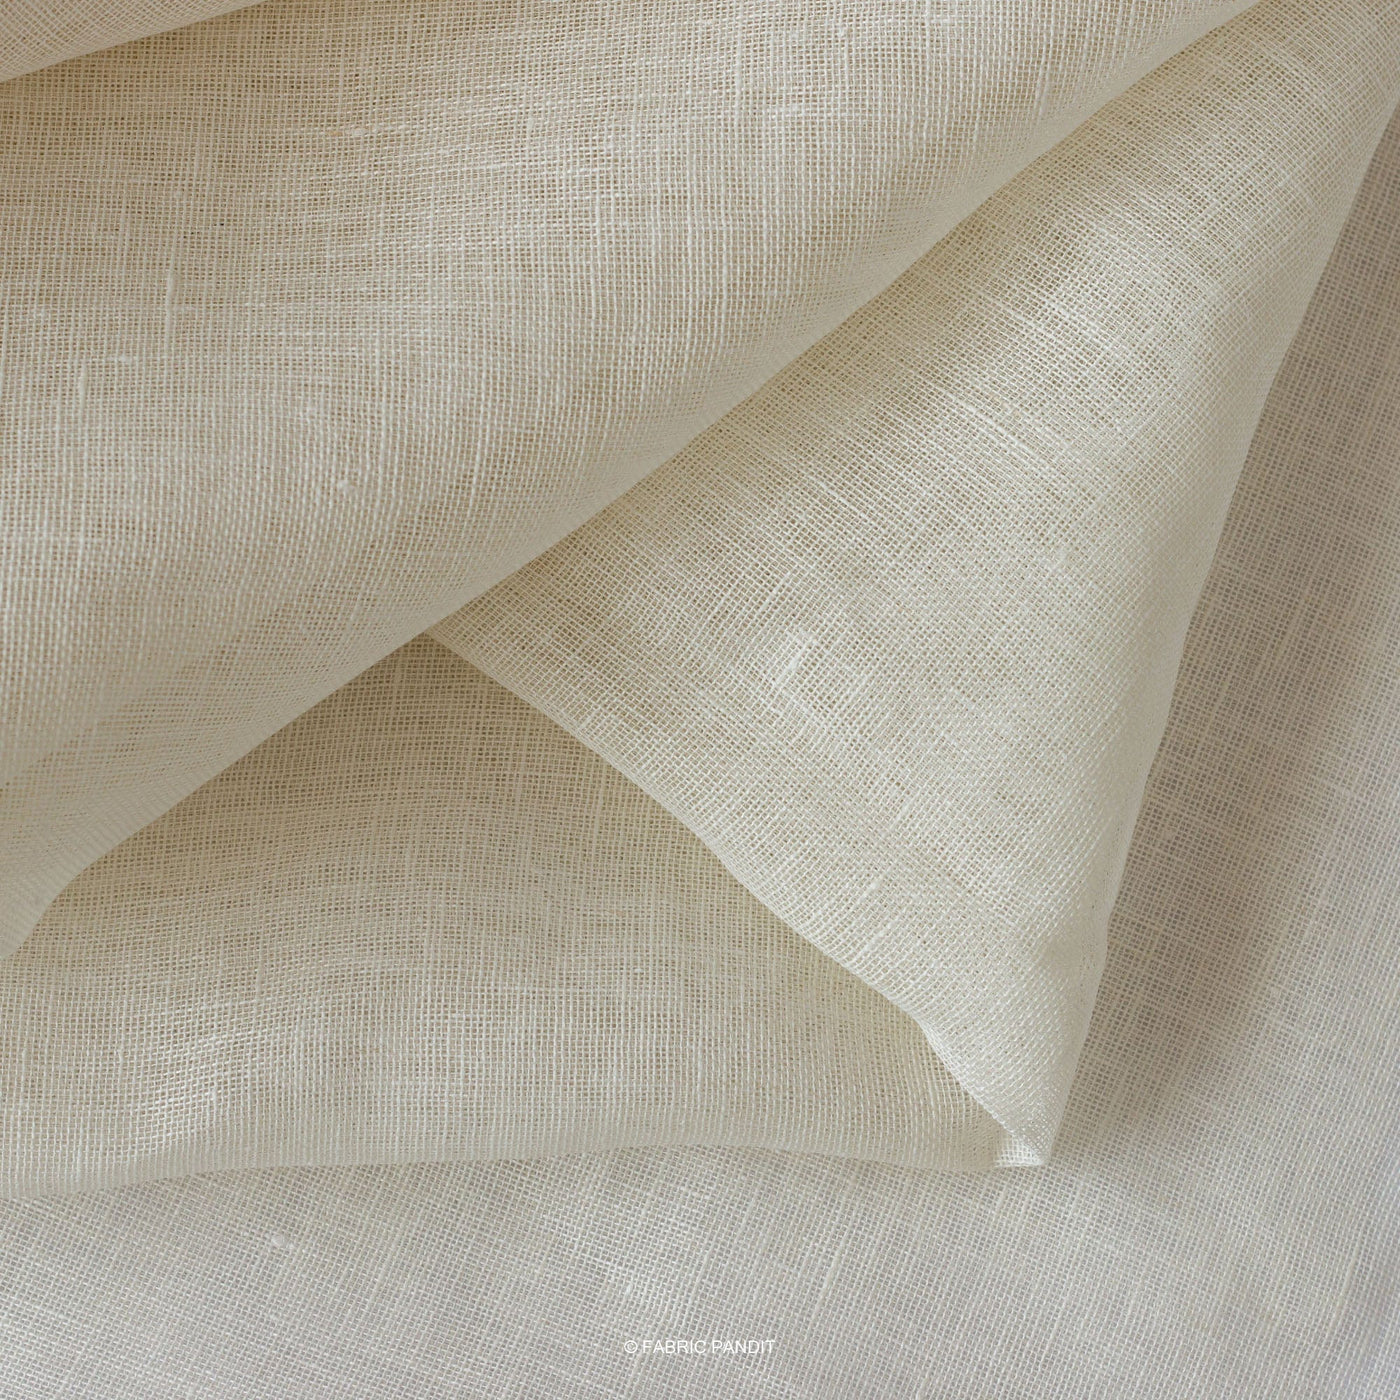 Off-White Dyeable Pure Linen Gauge Plain Fabric (Width 55 Inches